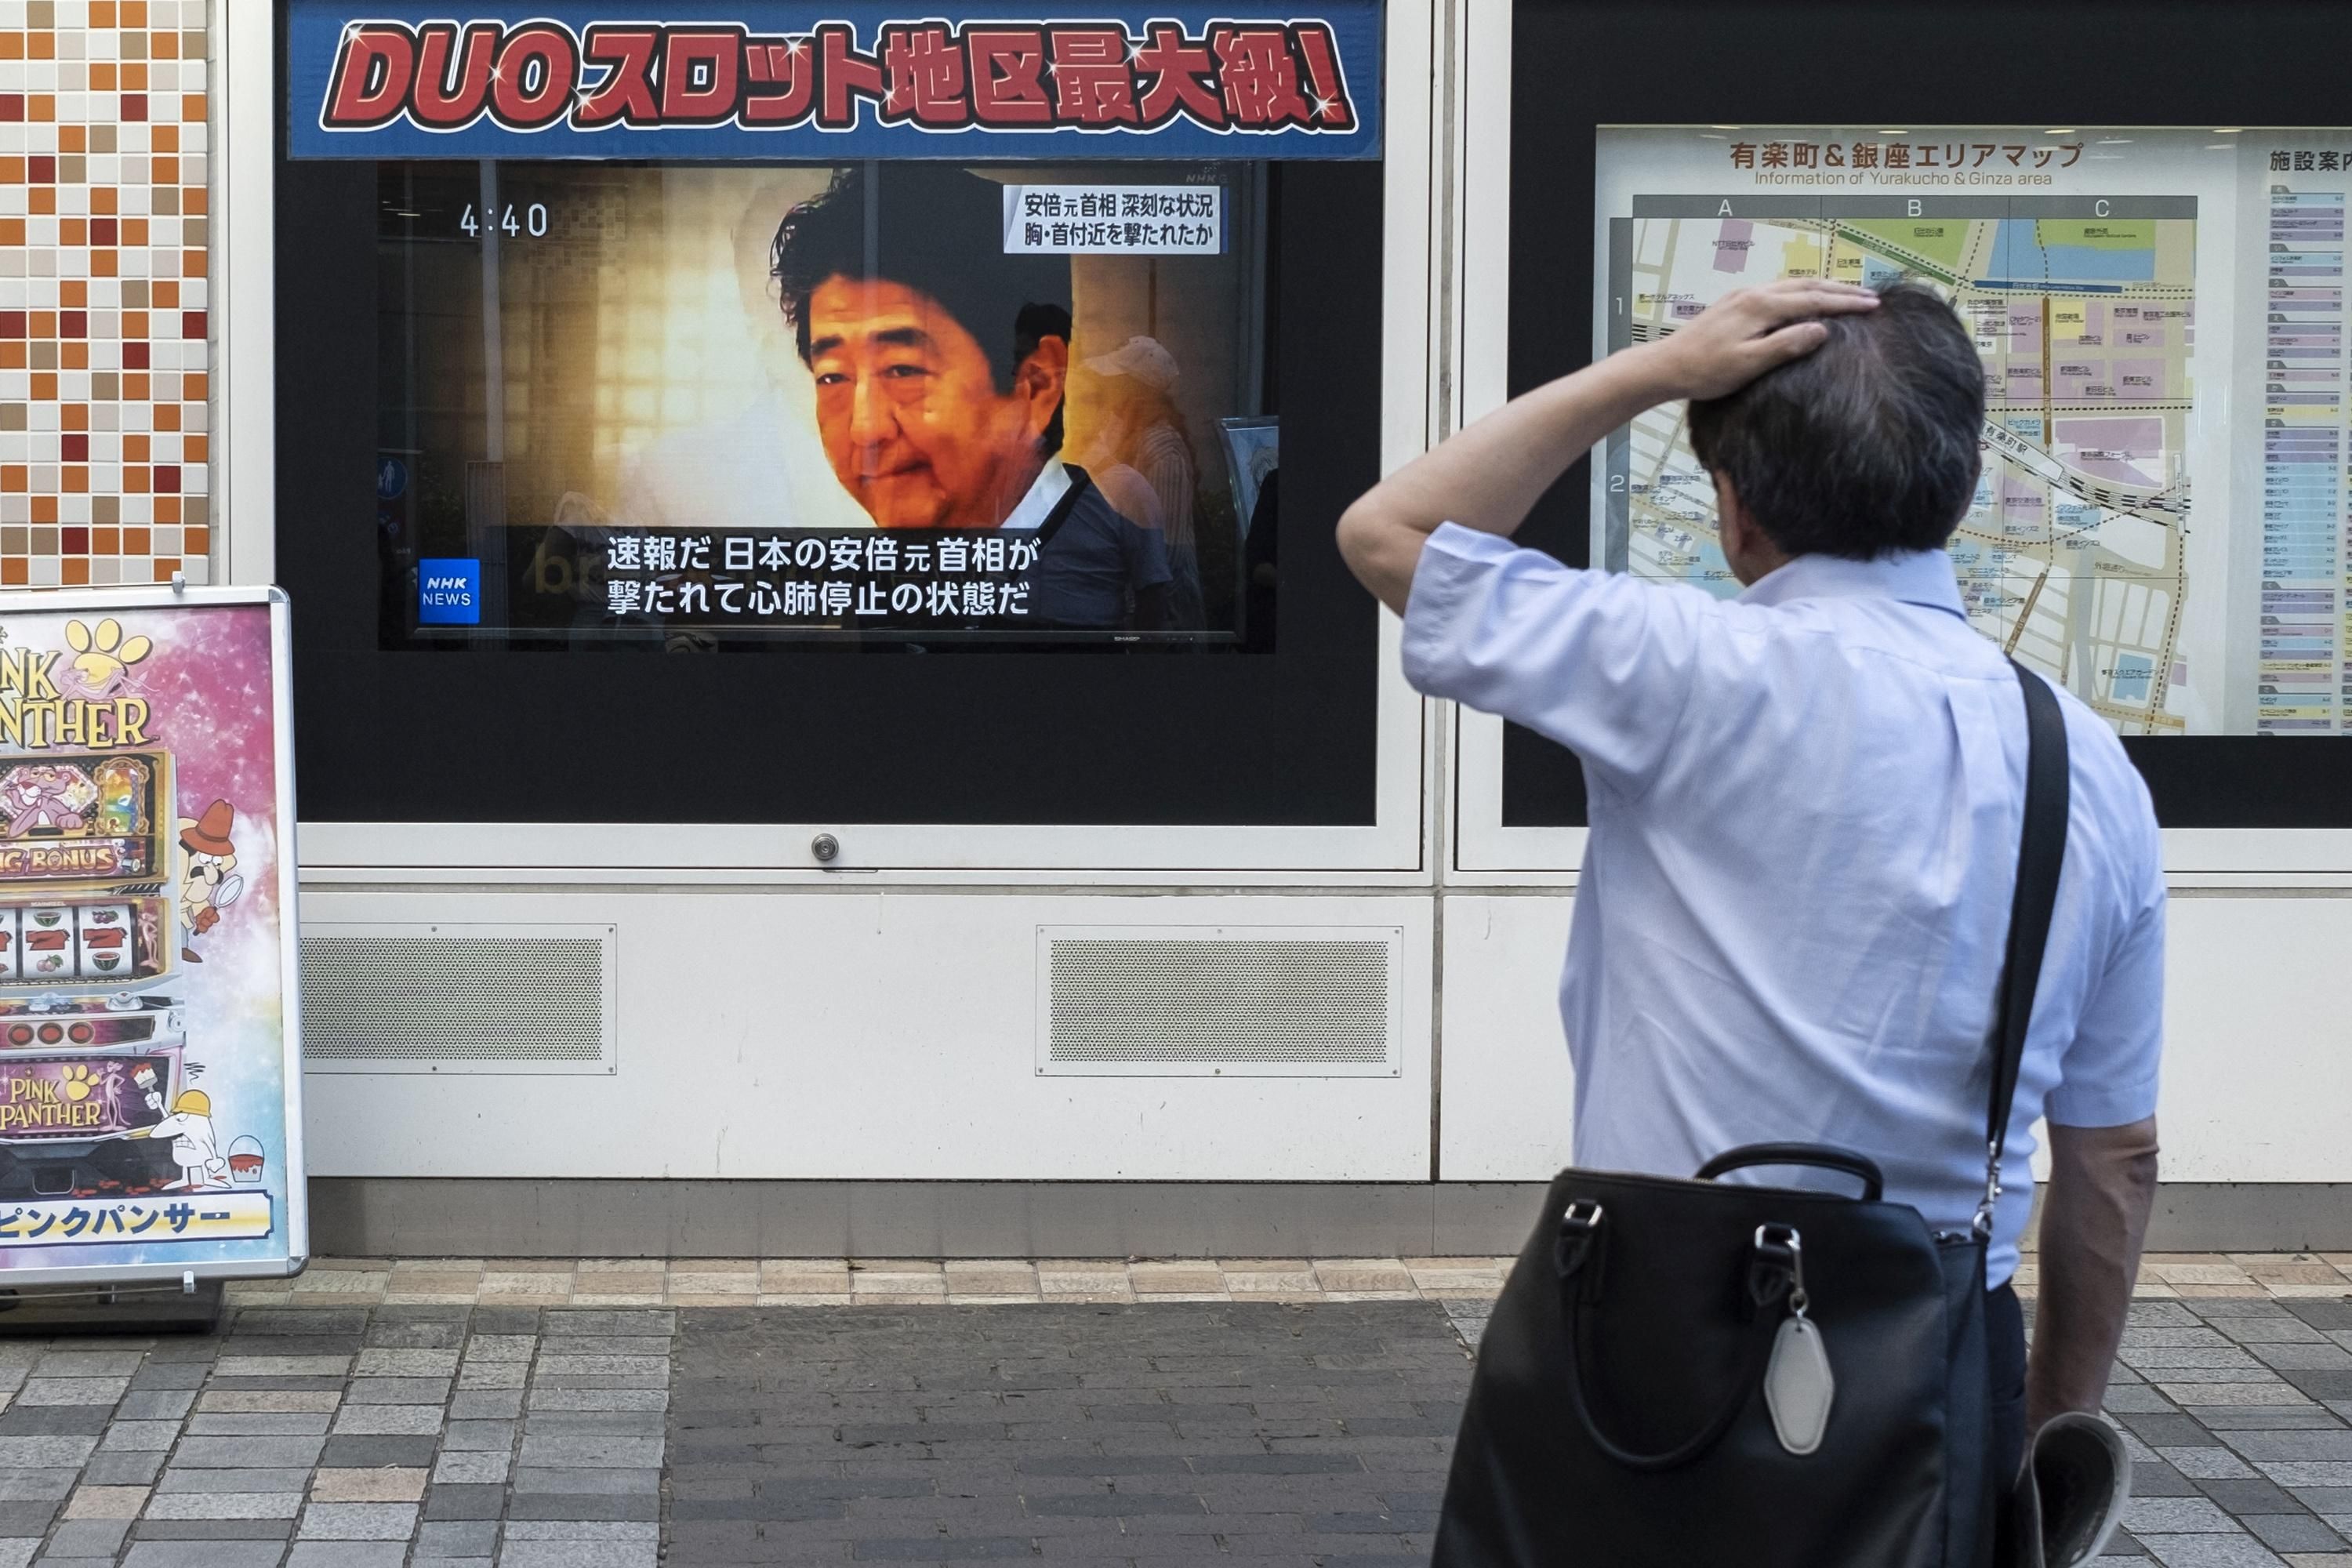 A television broadcast shows news of the attack on former Japanese Prime Minister Shinzo Abe